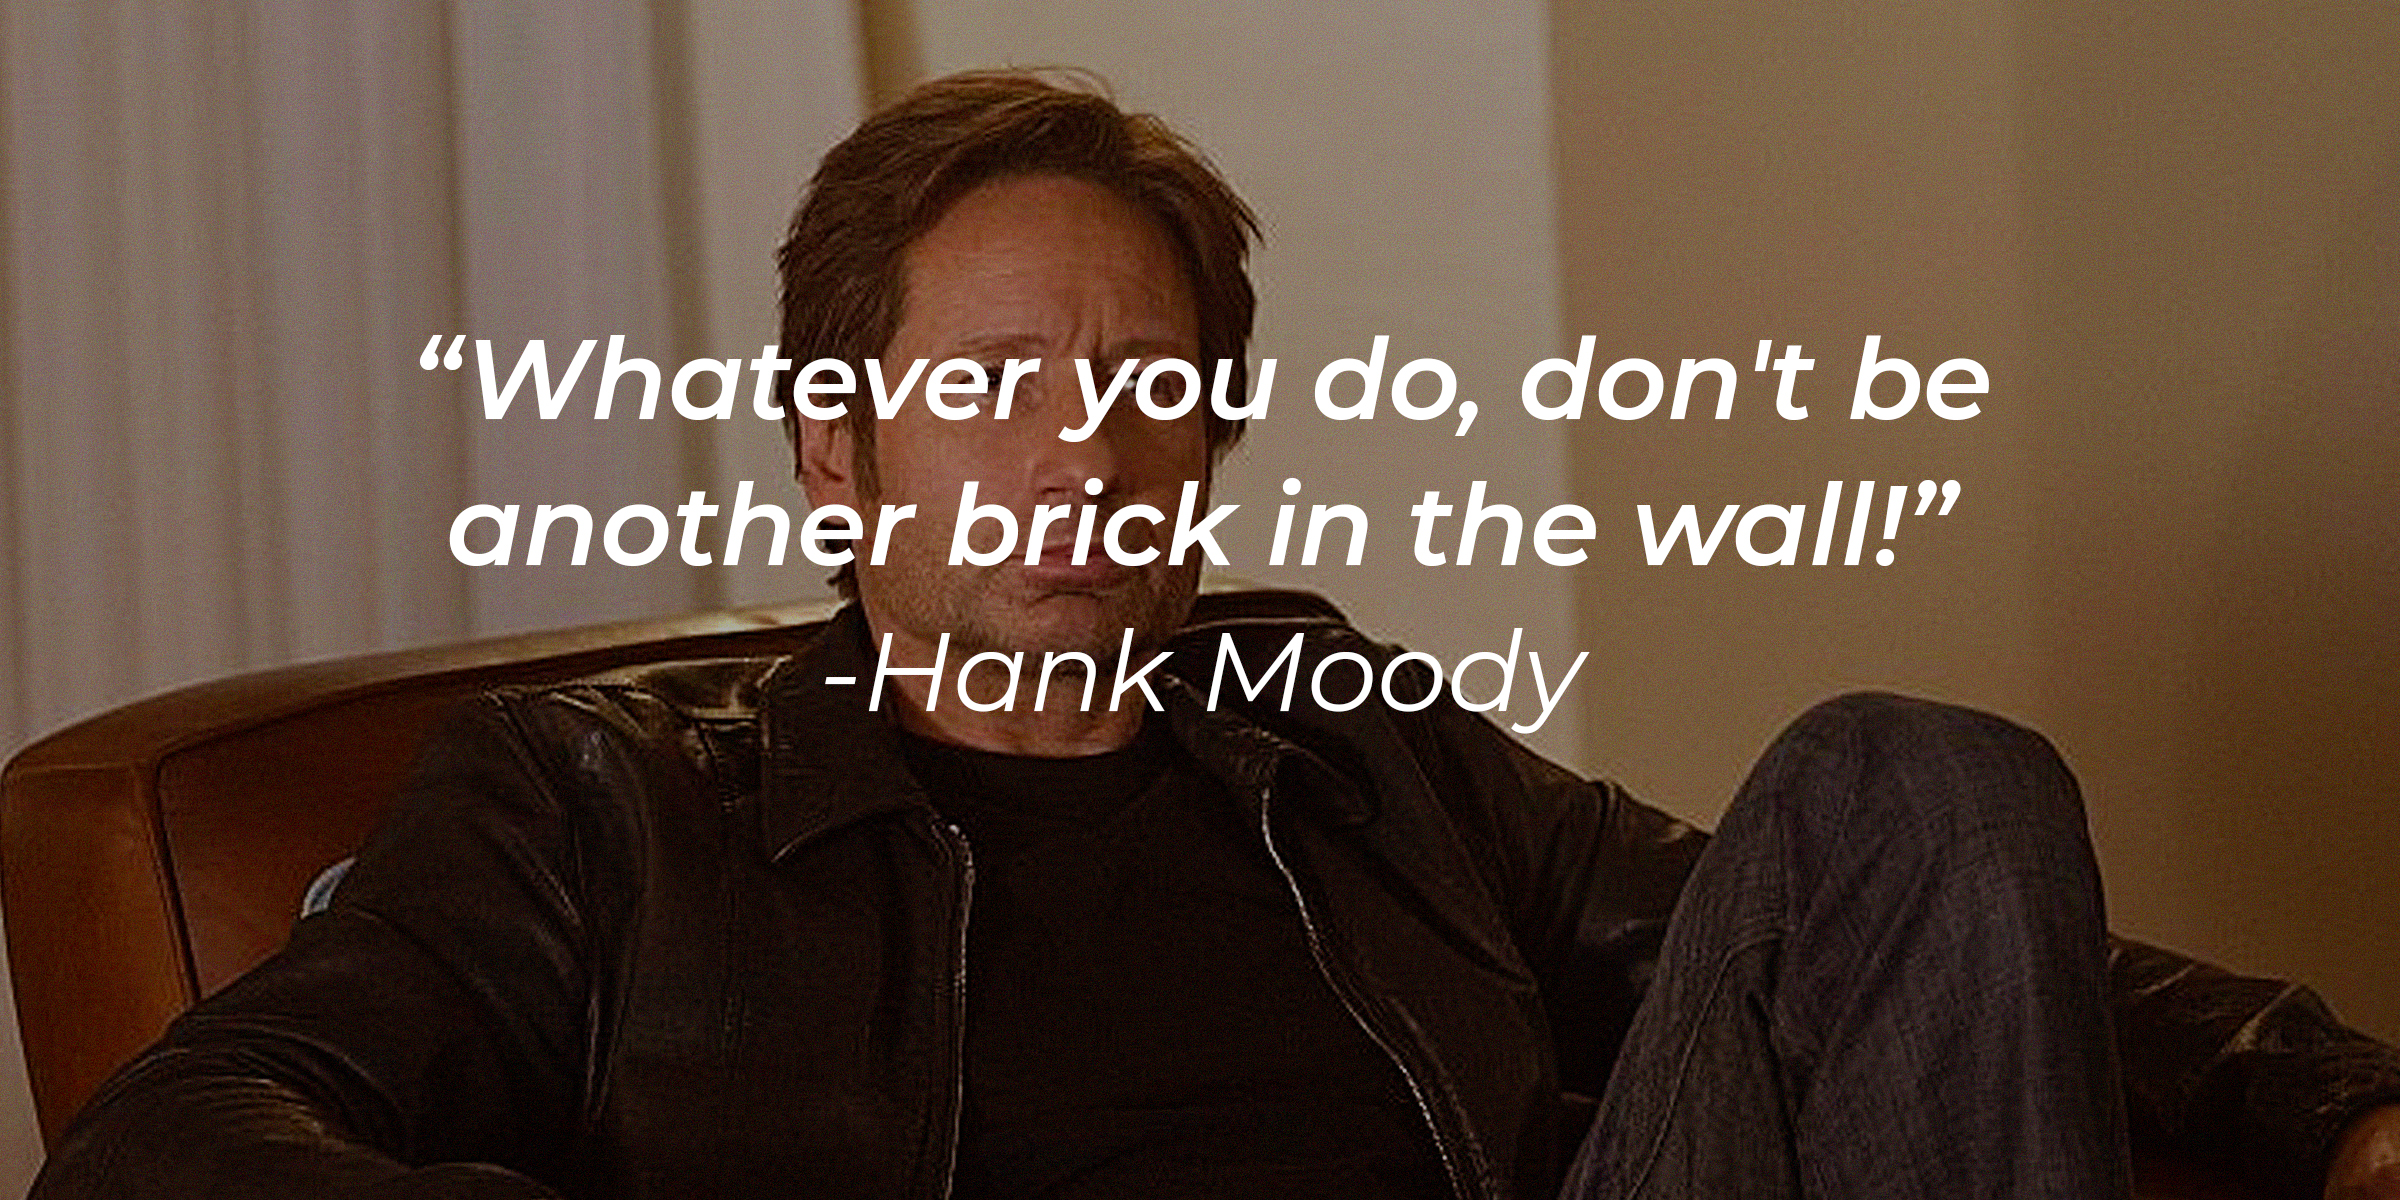 A photo of Hank Moody with his quote, "Whatever you do, don't be another brick in the wall!" | Source: Facebook/Californication